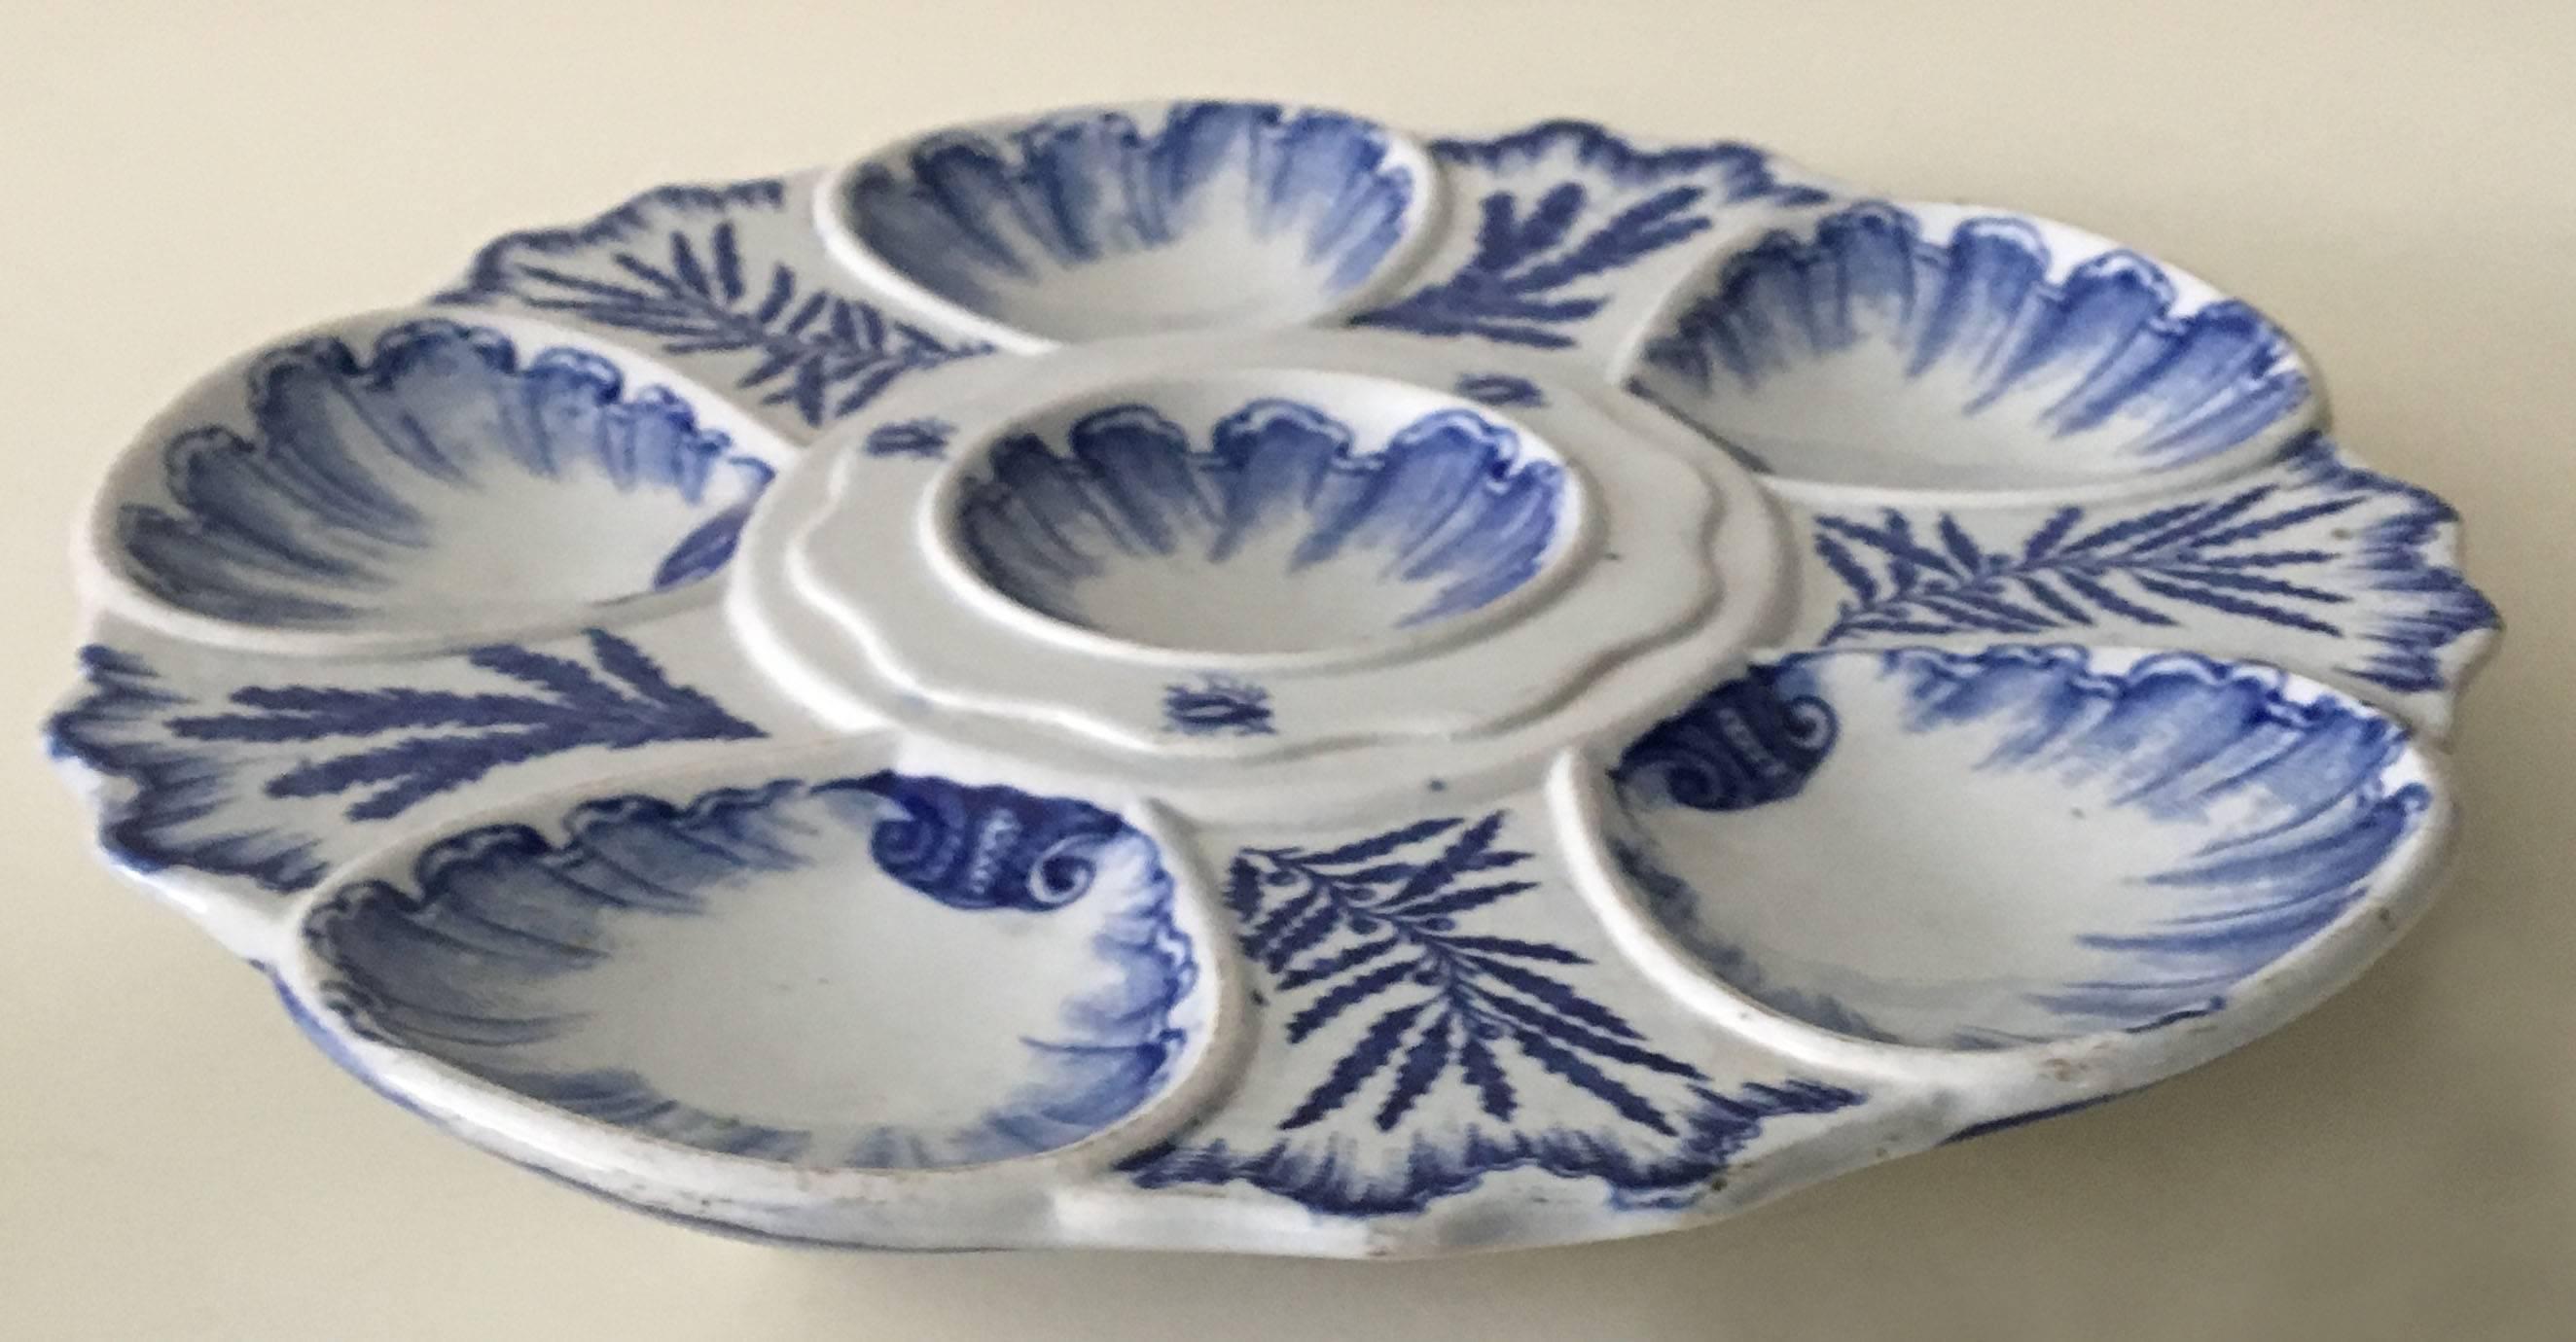 19th faience blue and white oyster plate signed J. Vieillard & Cie Bordeaux decorated with seaweeds.
Mark / 1829-1895.
 